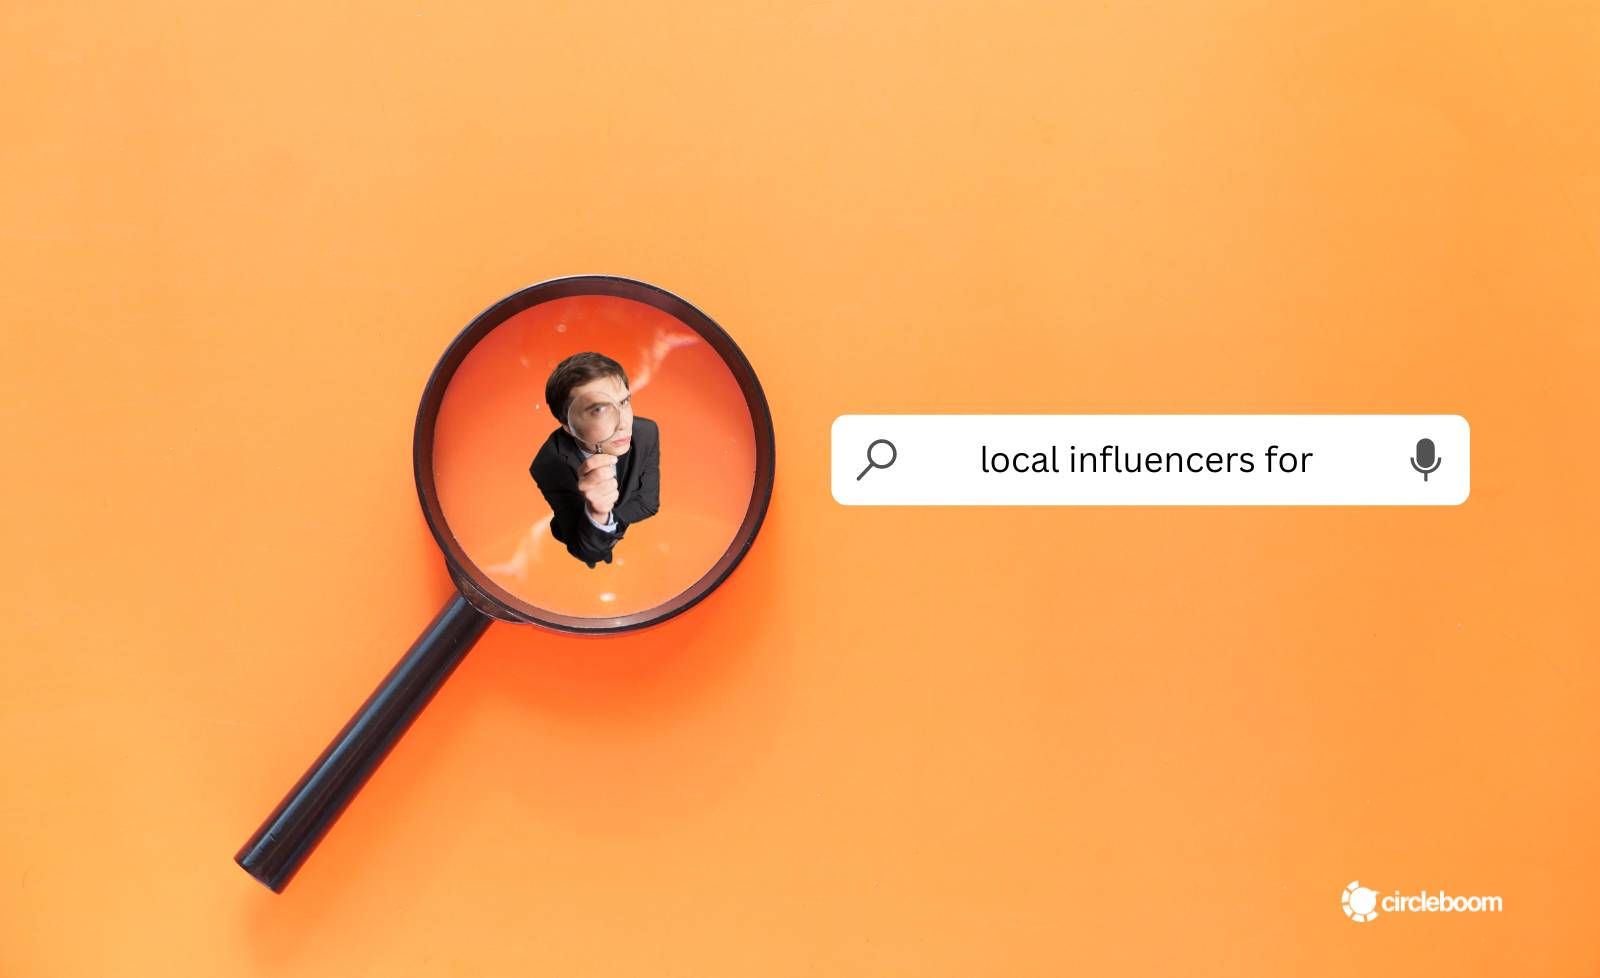 How to search for and find influencers by location!